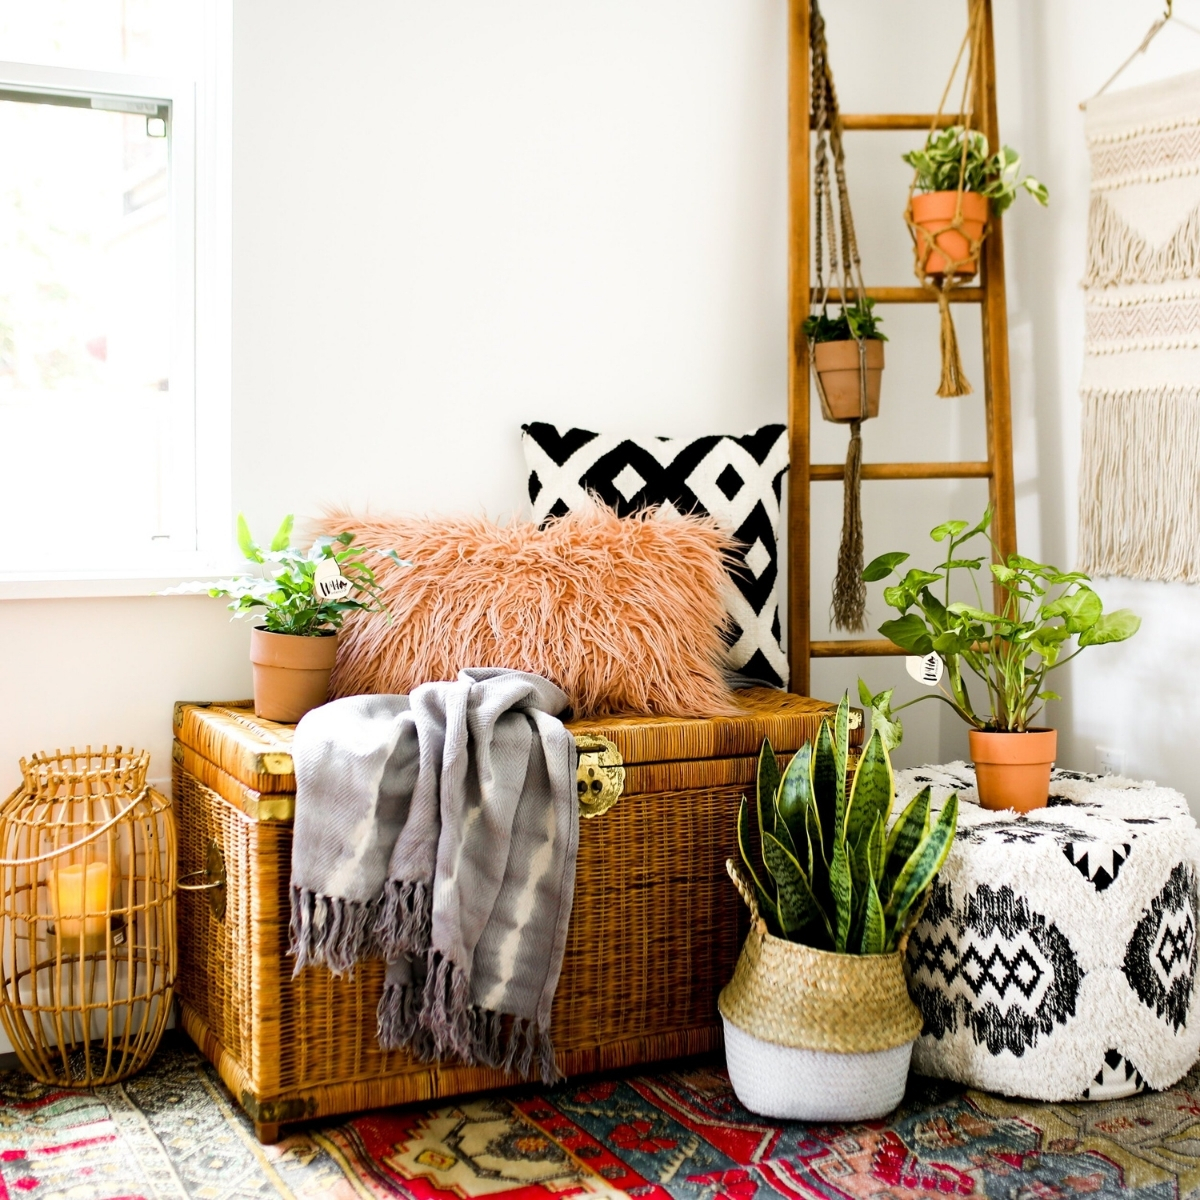 Check Out 10 Essential Plants for a Bohemian Interior - Article on ...